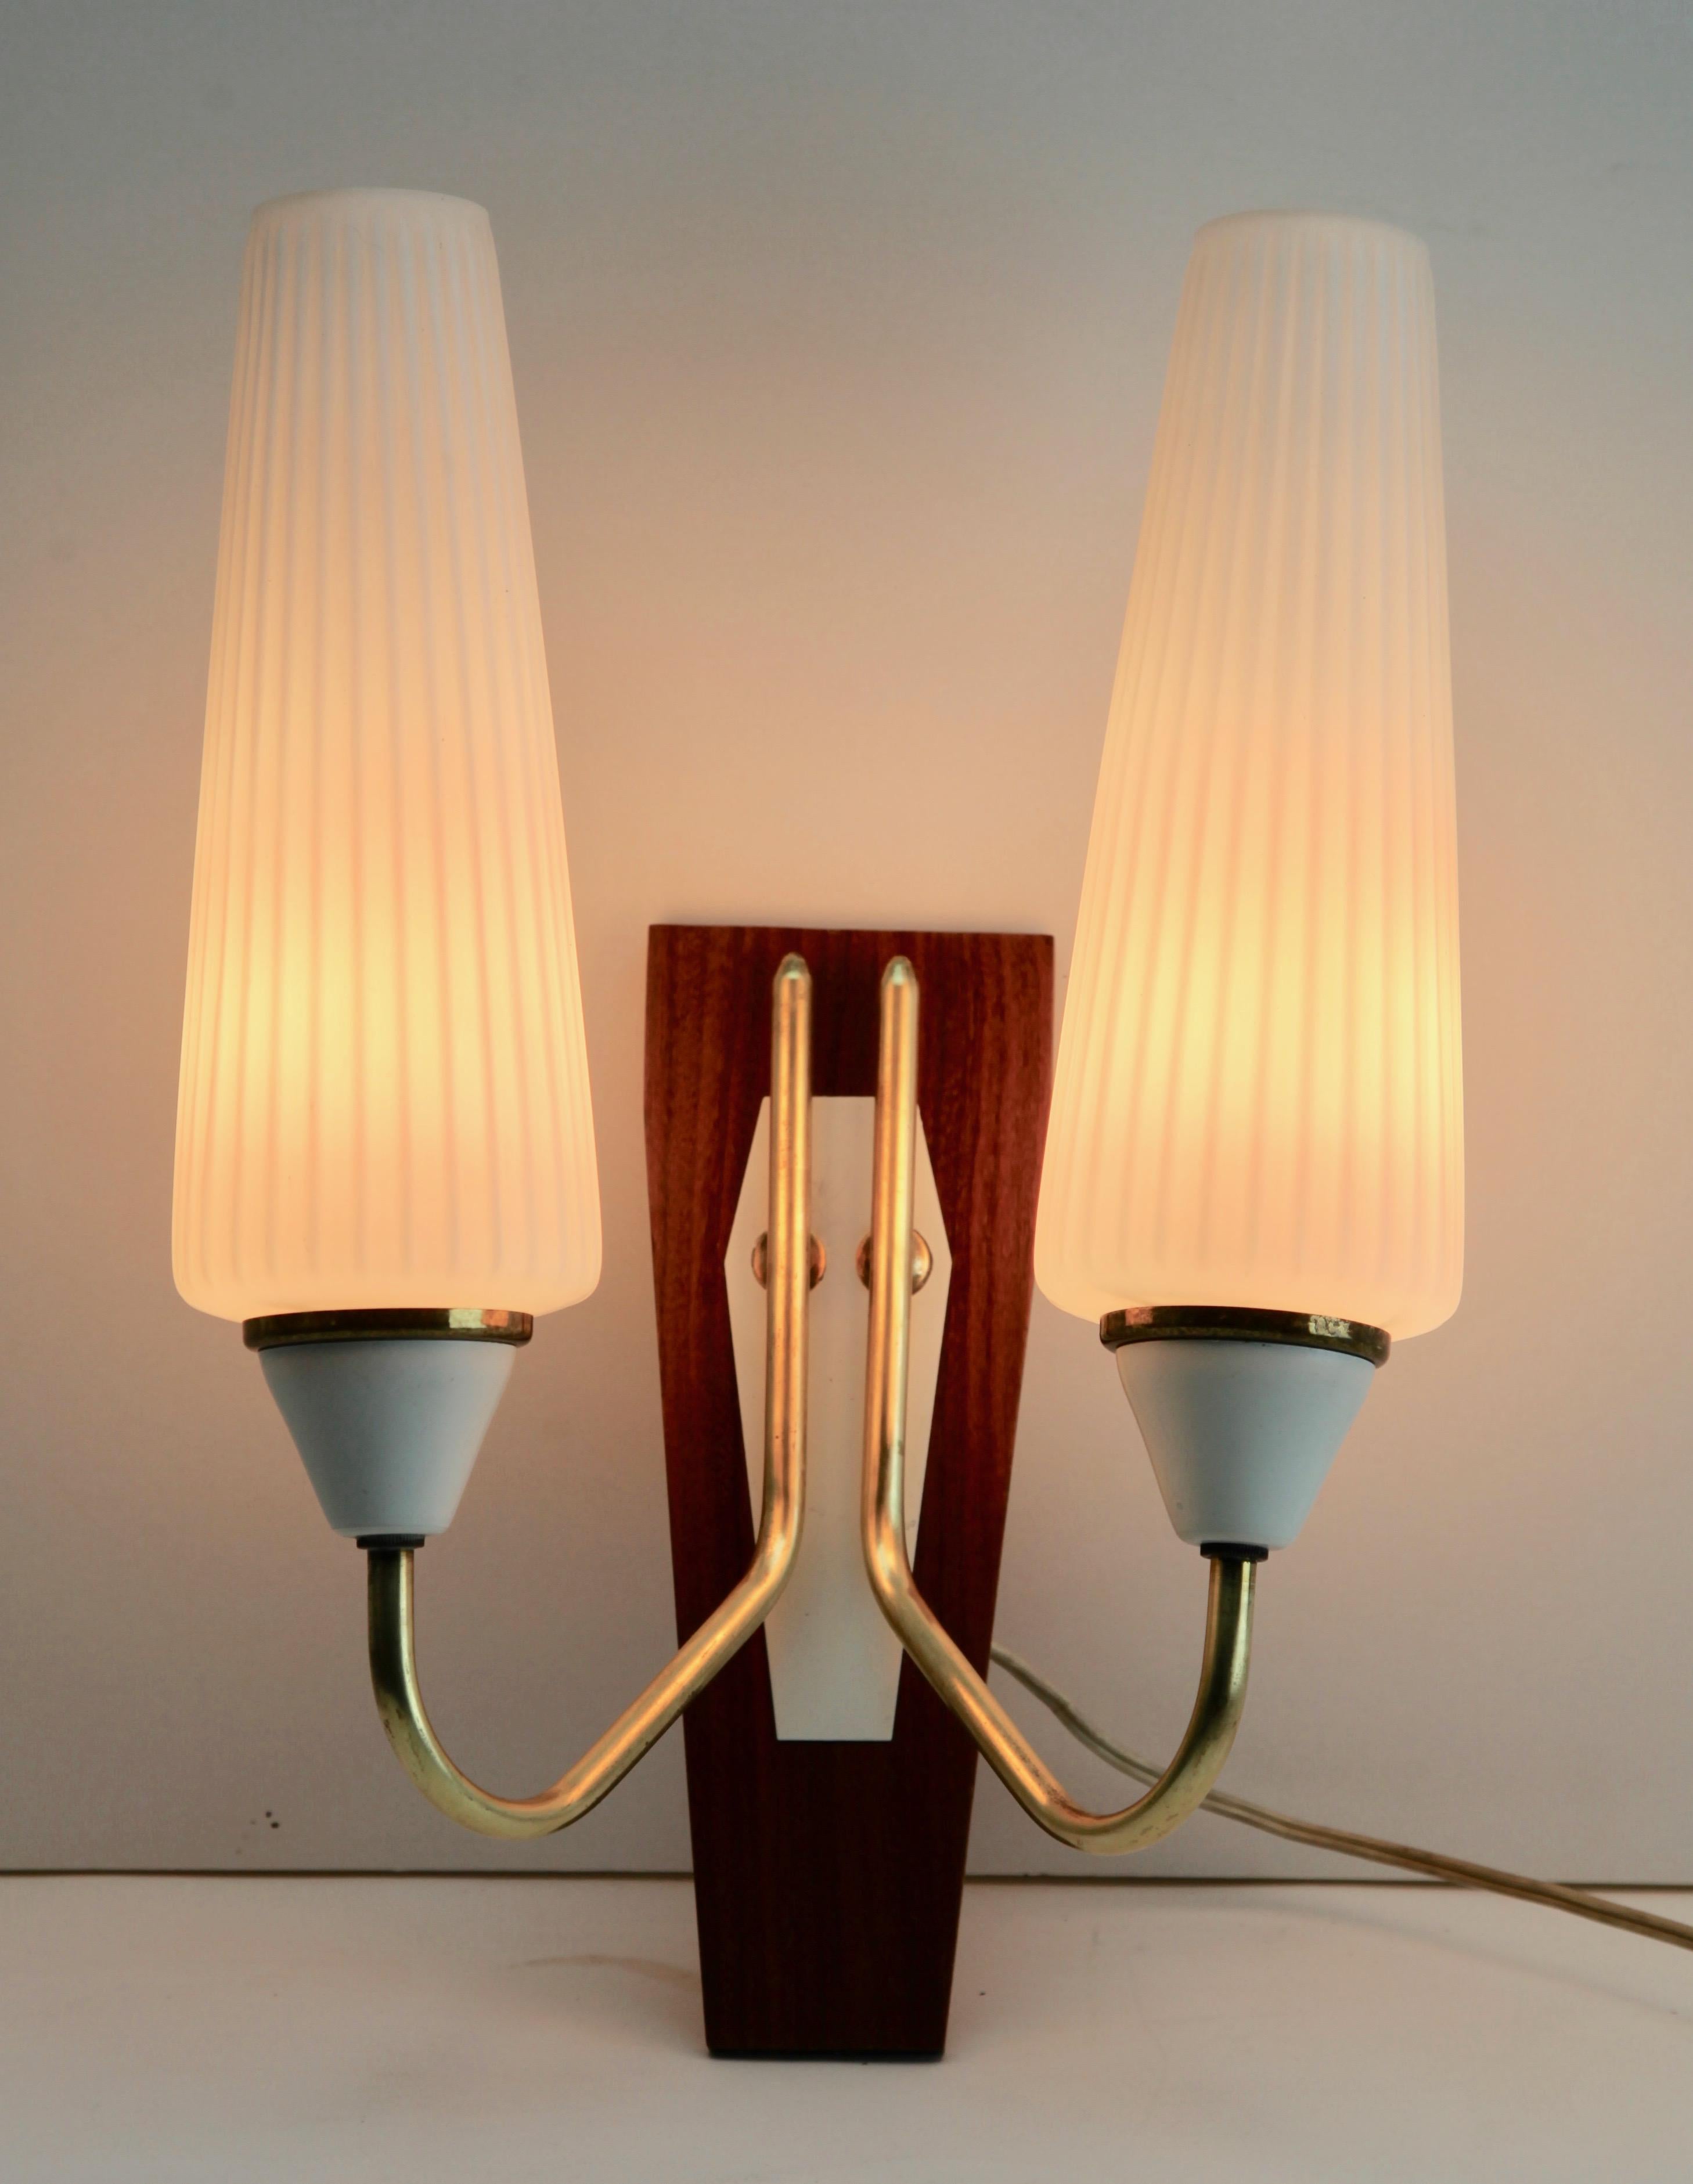 Mid-20th Century Vintage 2 Arms Wall Mount Lamp in the Style of Stilnovo, Italian, 1960s